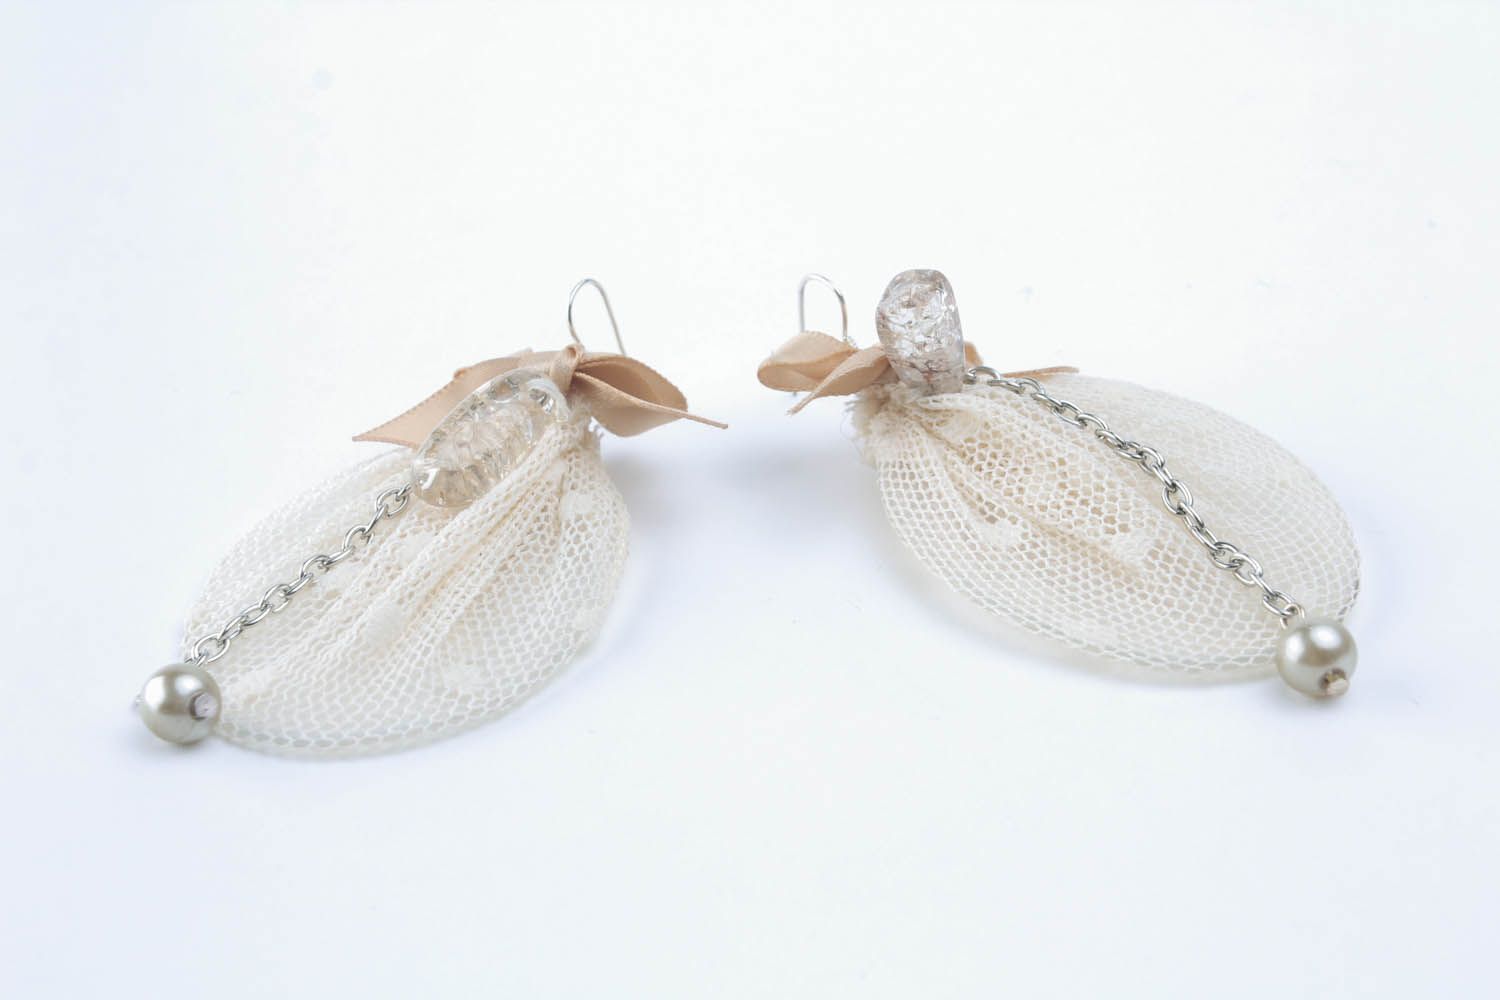 Earrings with lace and bows photo 4